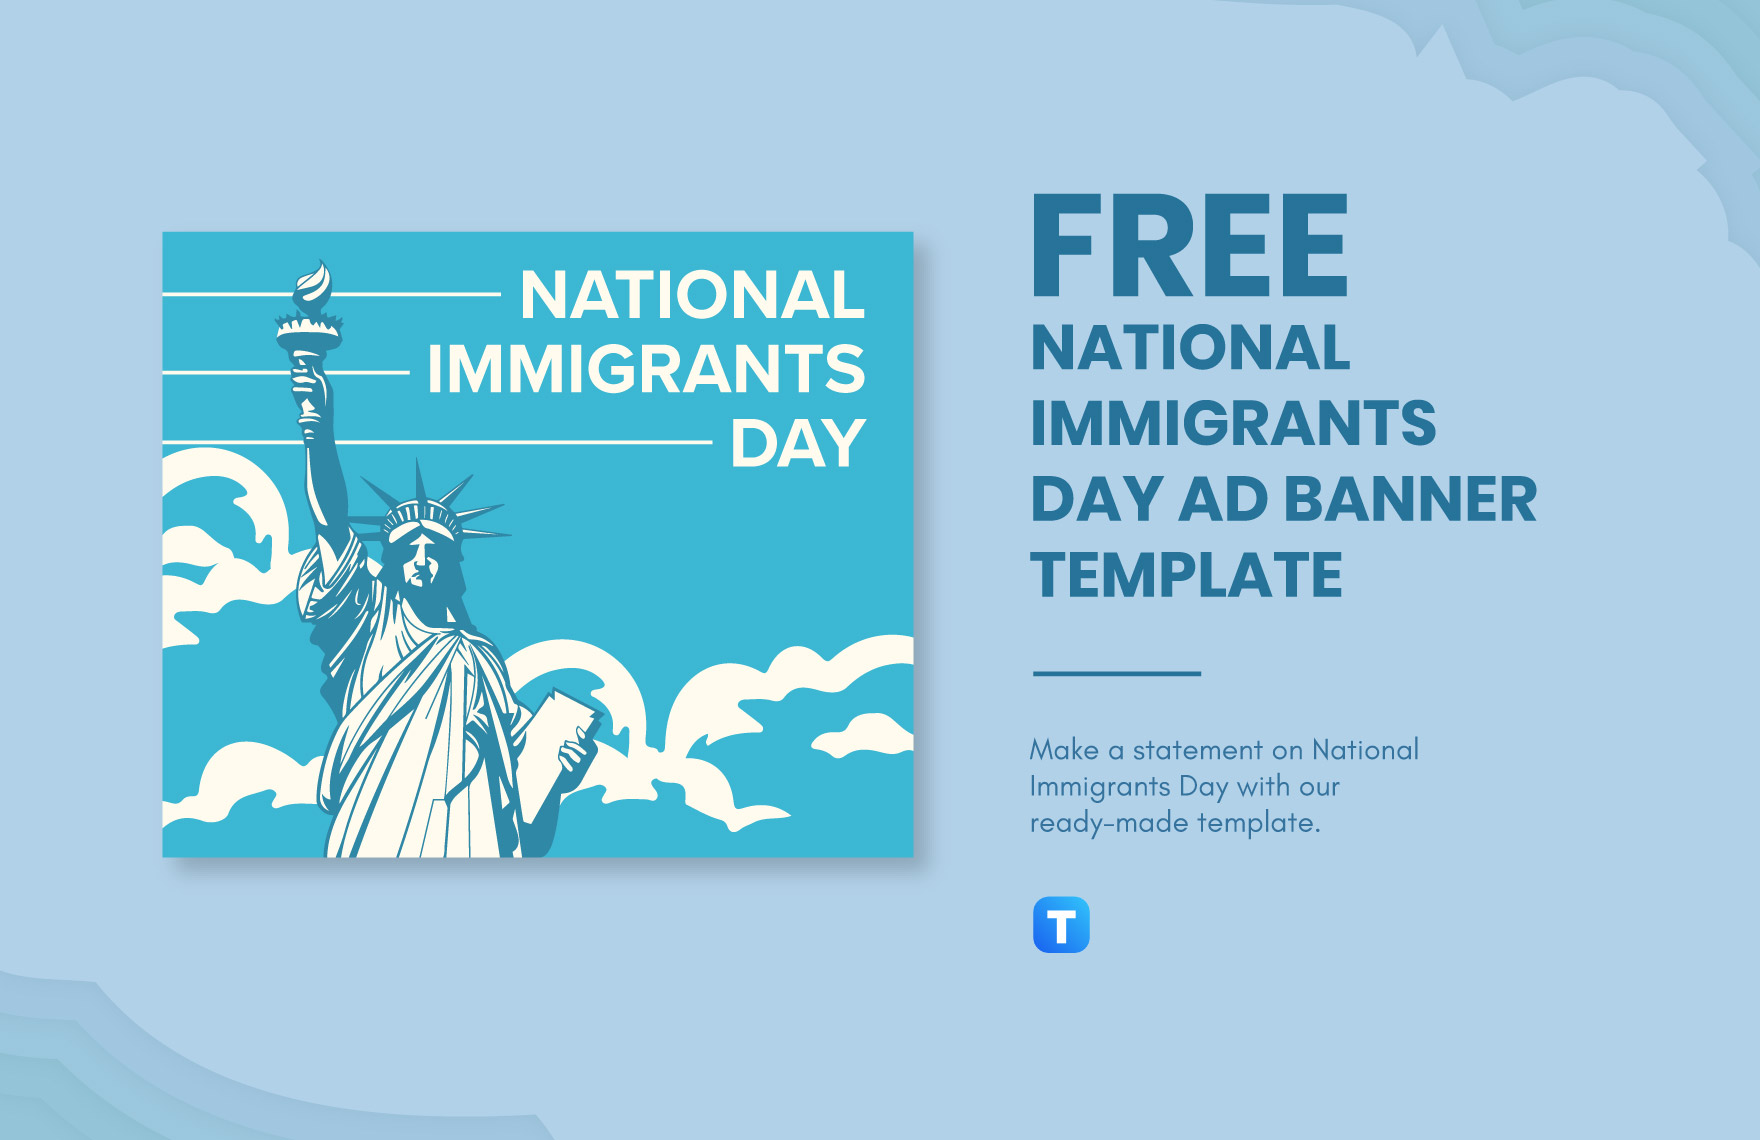 National Immigrants Day Ad Banner Template